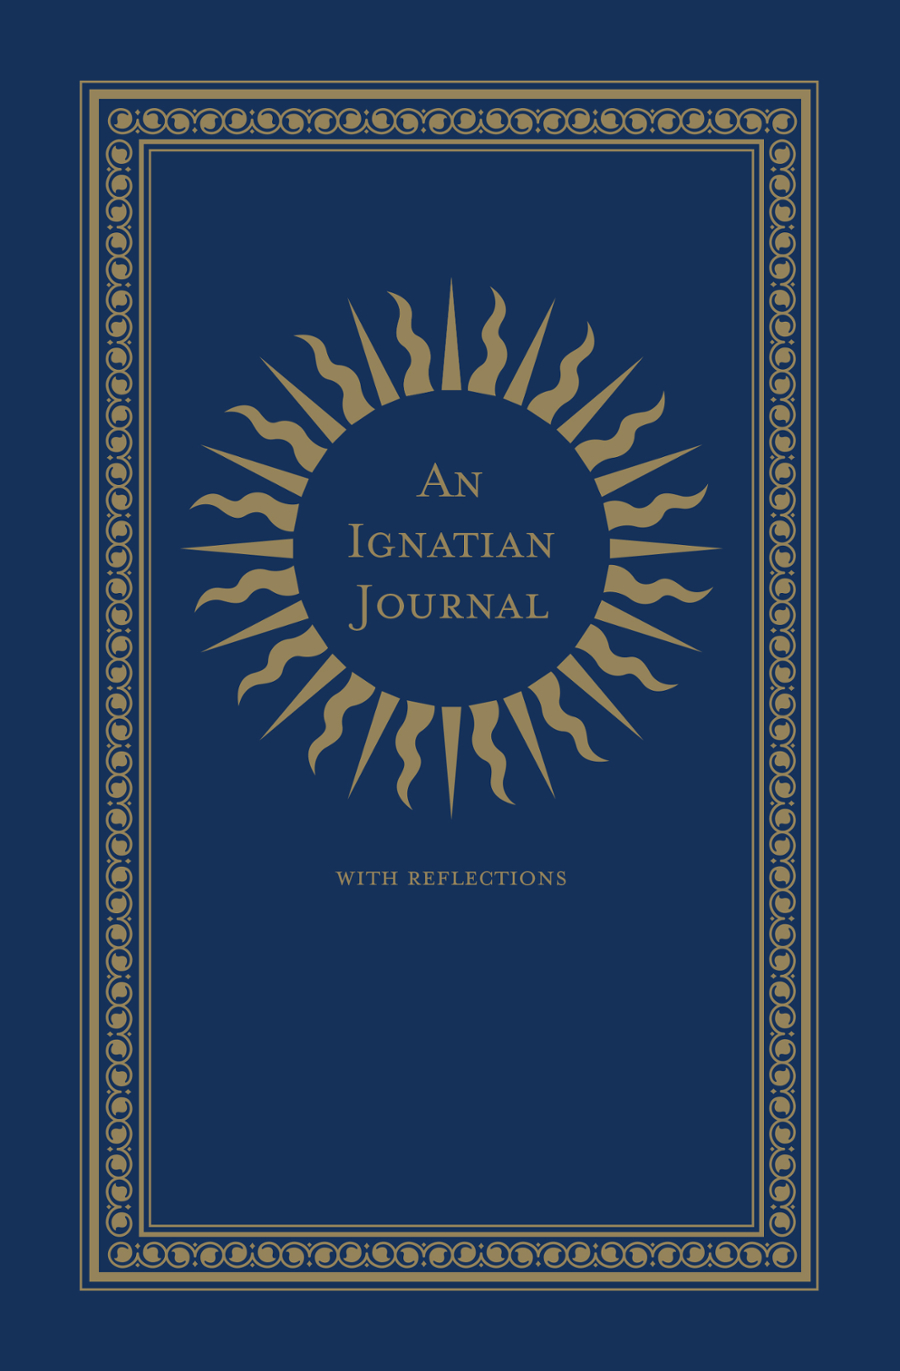 Cover for "An Ignatian Journal" publication